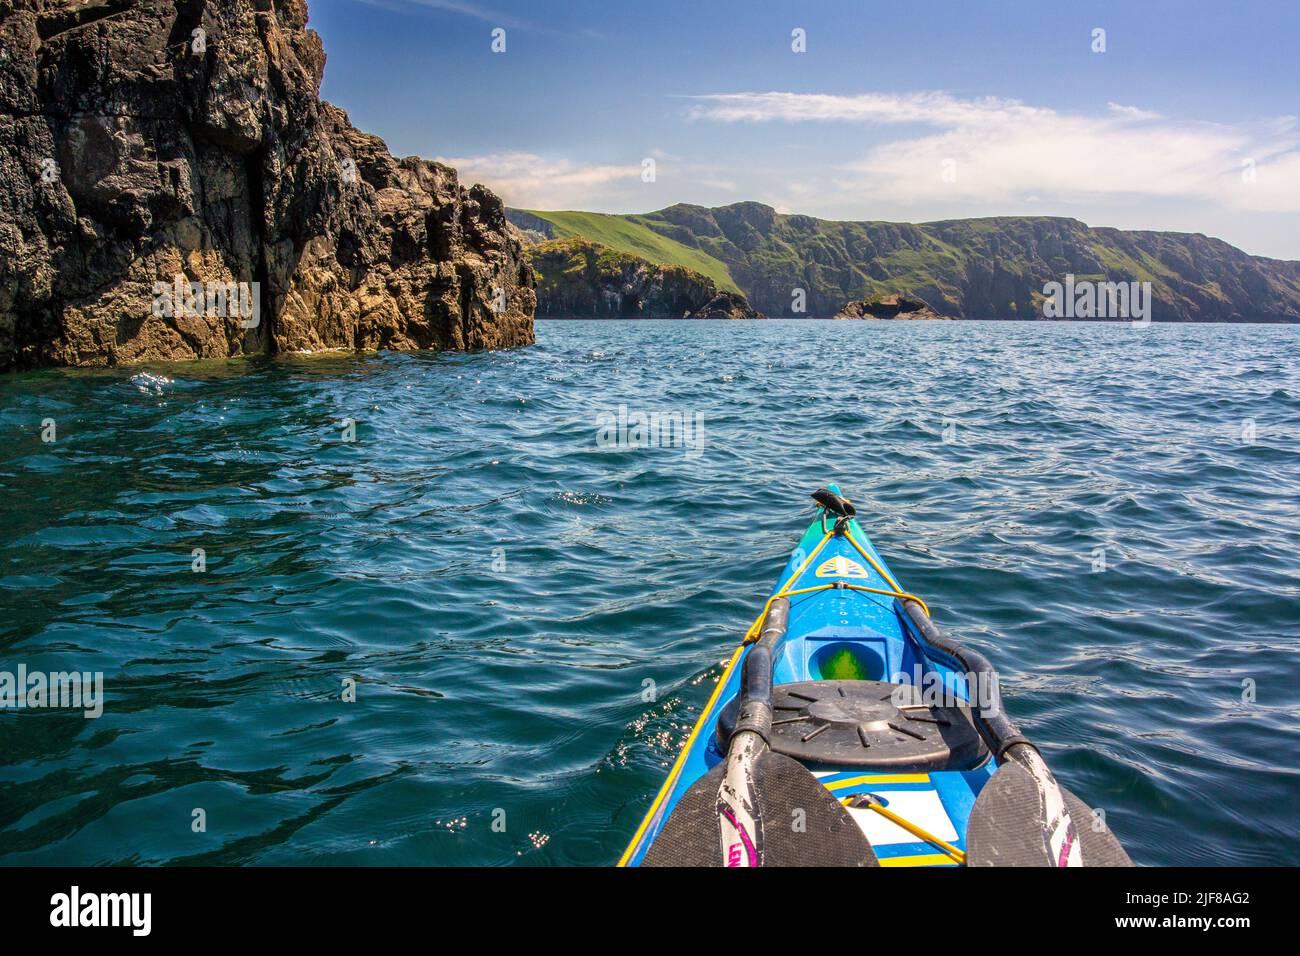 Sea kayaking at Pwll Deri off the Pembrokeshire Coast in Wales Stock Photo